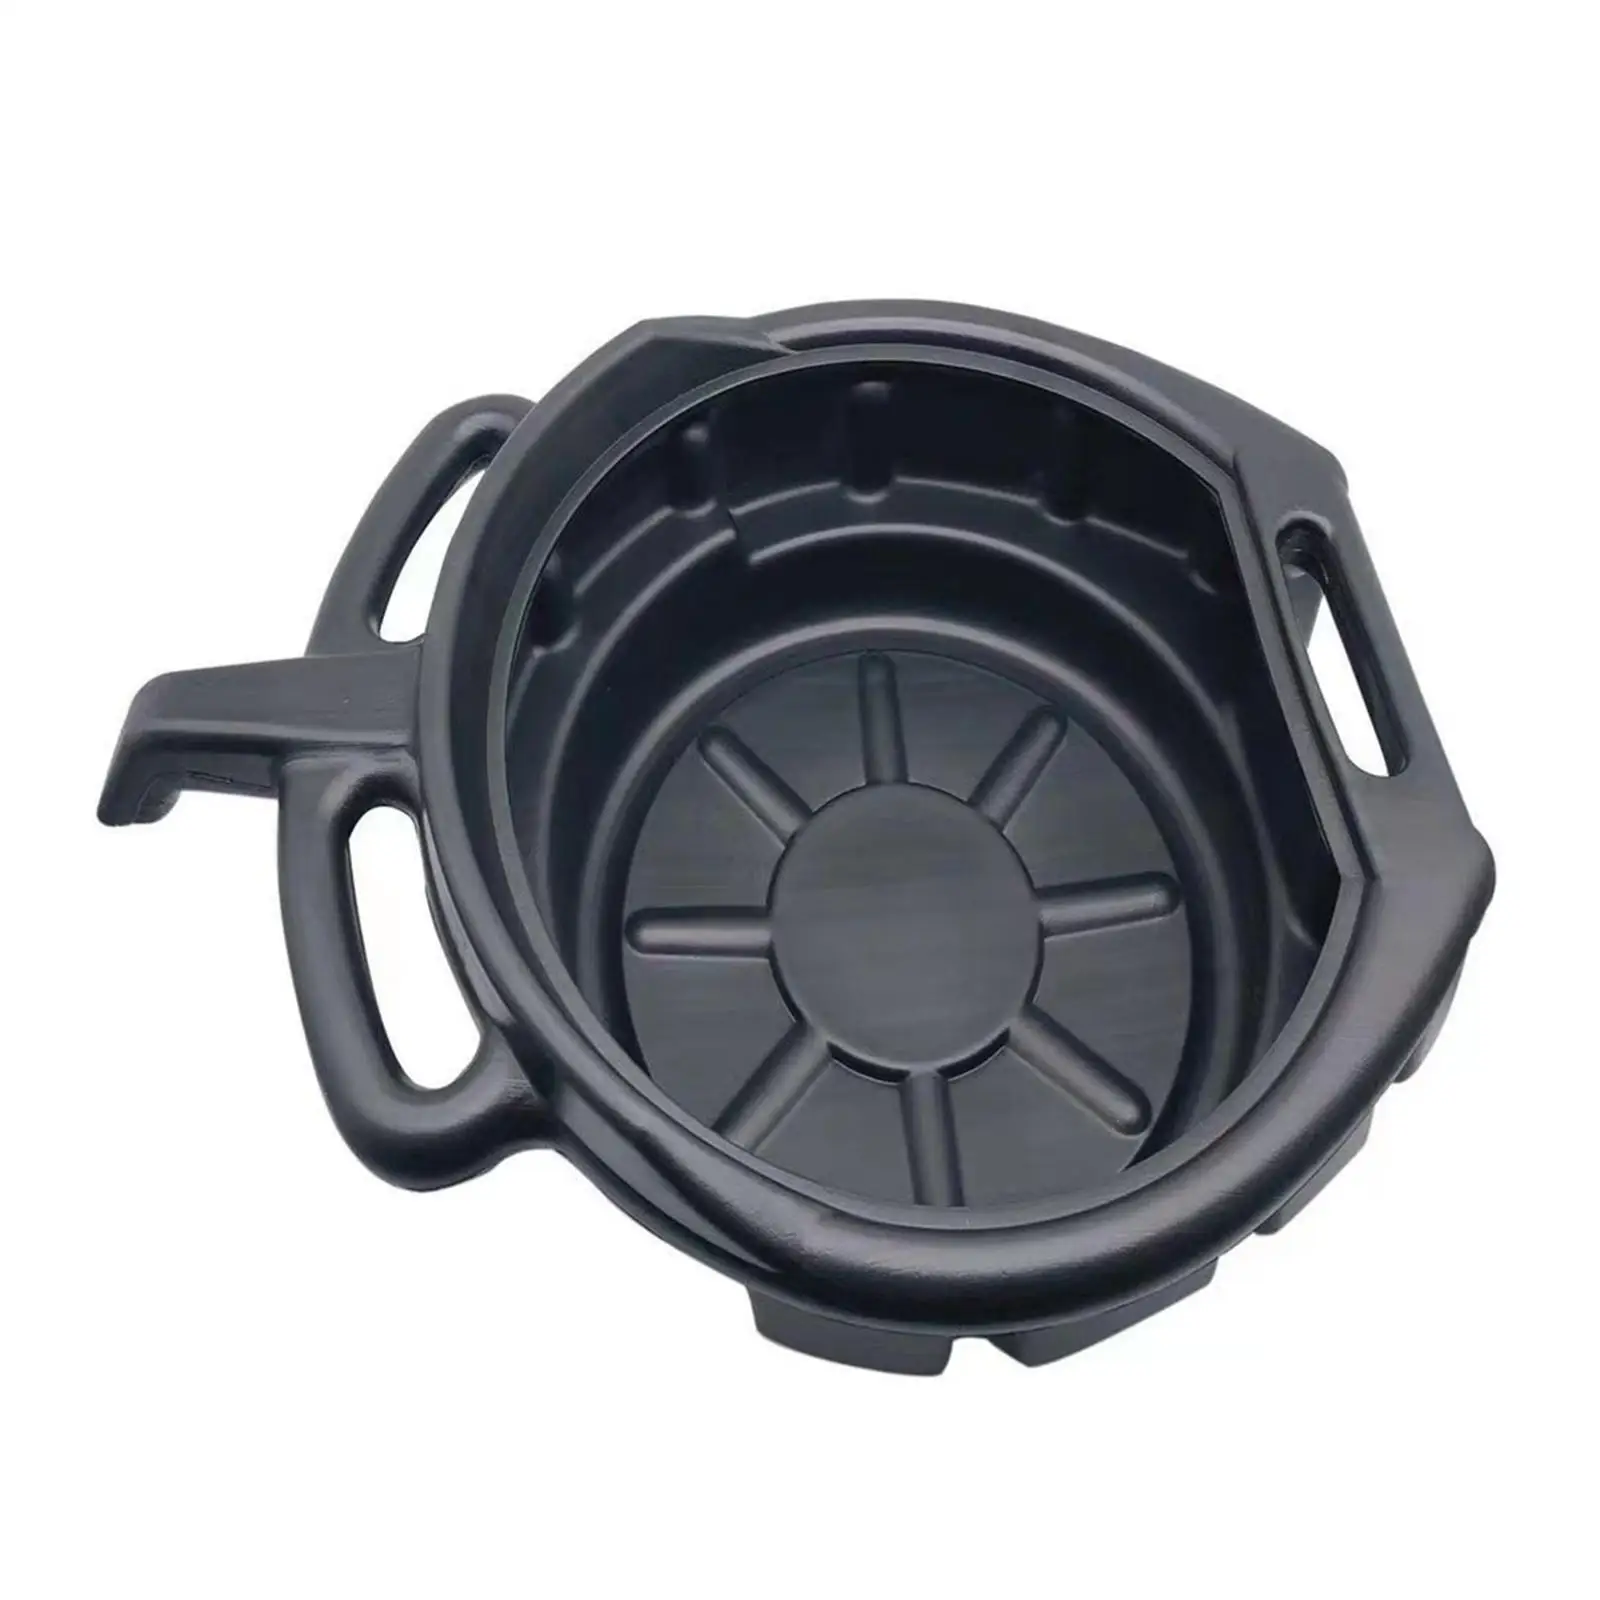 Oil Drain Container Can Leak Multifunction 10L Large Capacity Oil Trip Tray for Boat Workshop Vehicle Car Fuel Fluid